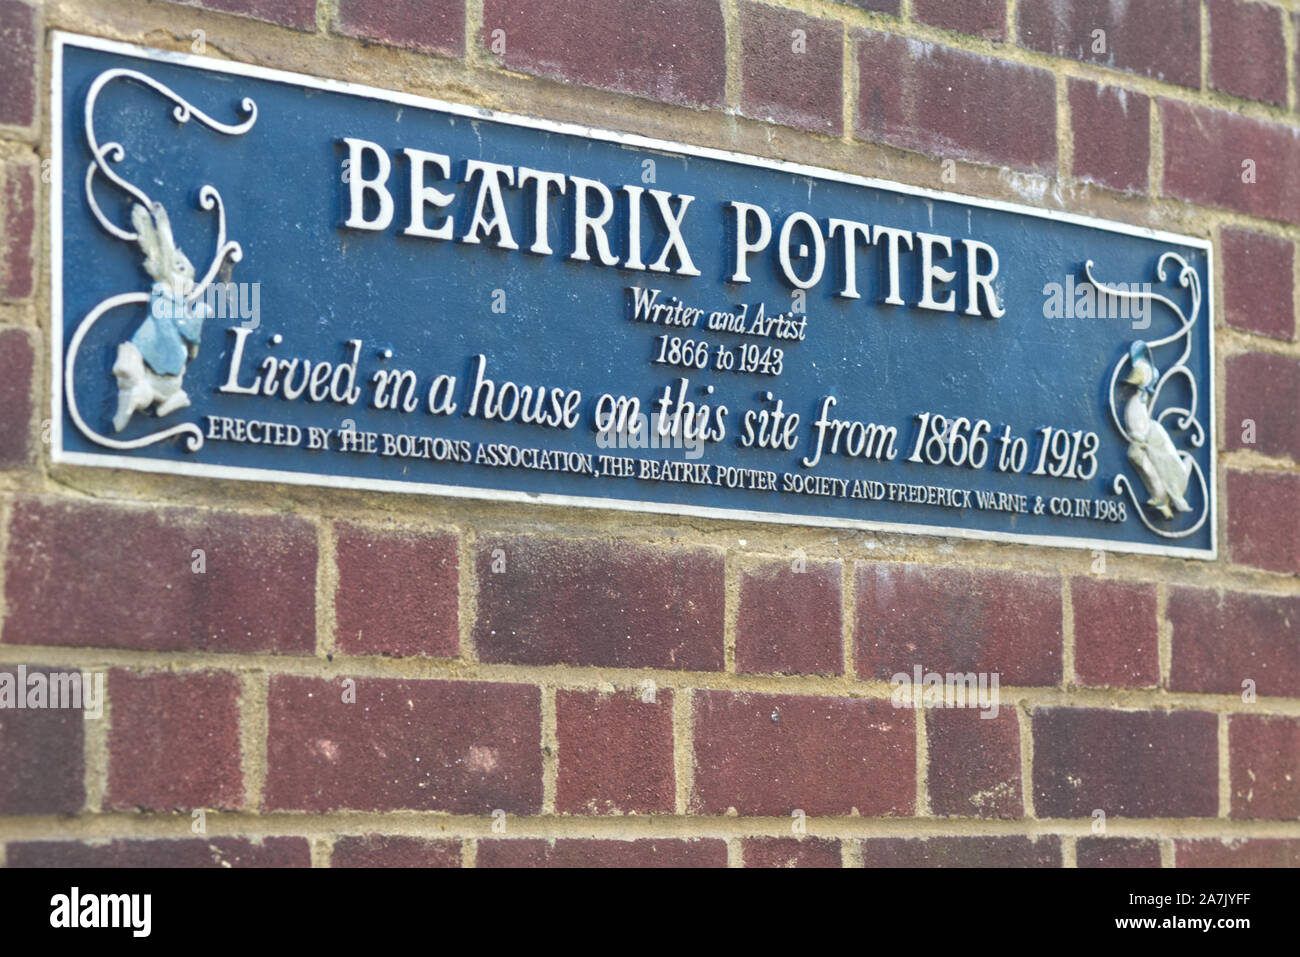 Beatrix Potter writer and artist 1866 to 1913 lived a house on this site, The Boltons London Stock Photo